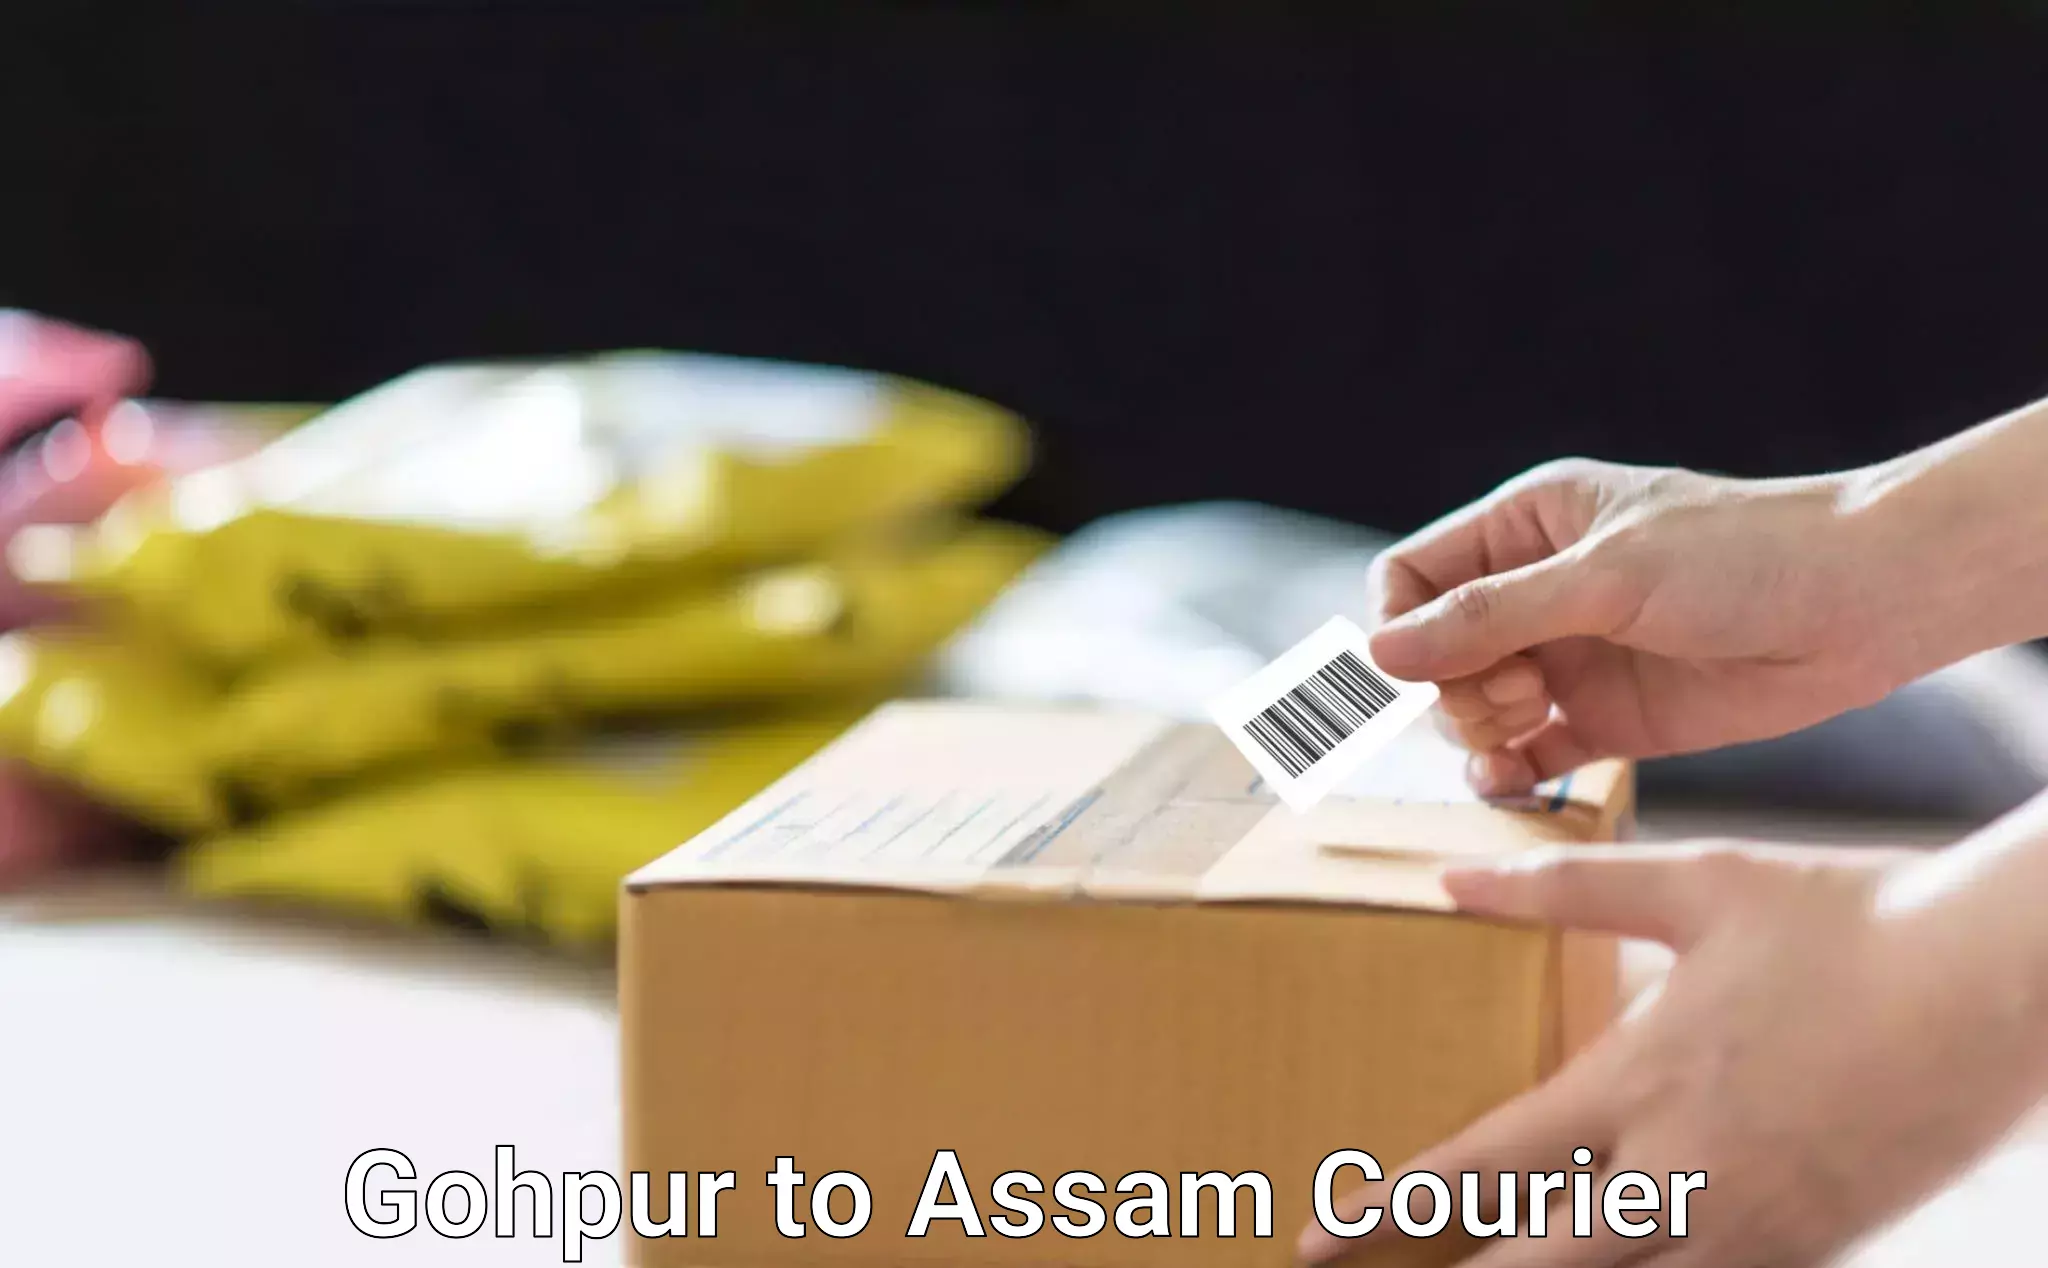 Residential courier service in Gohpur to Chapar